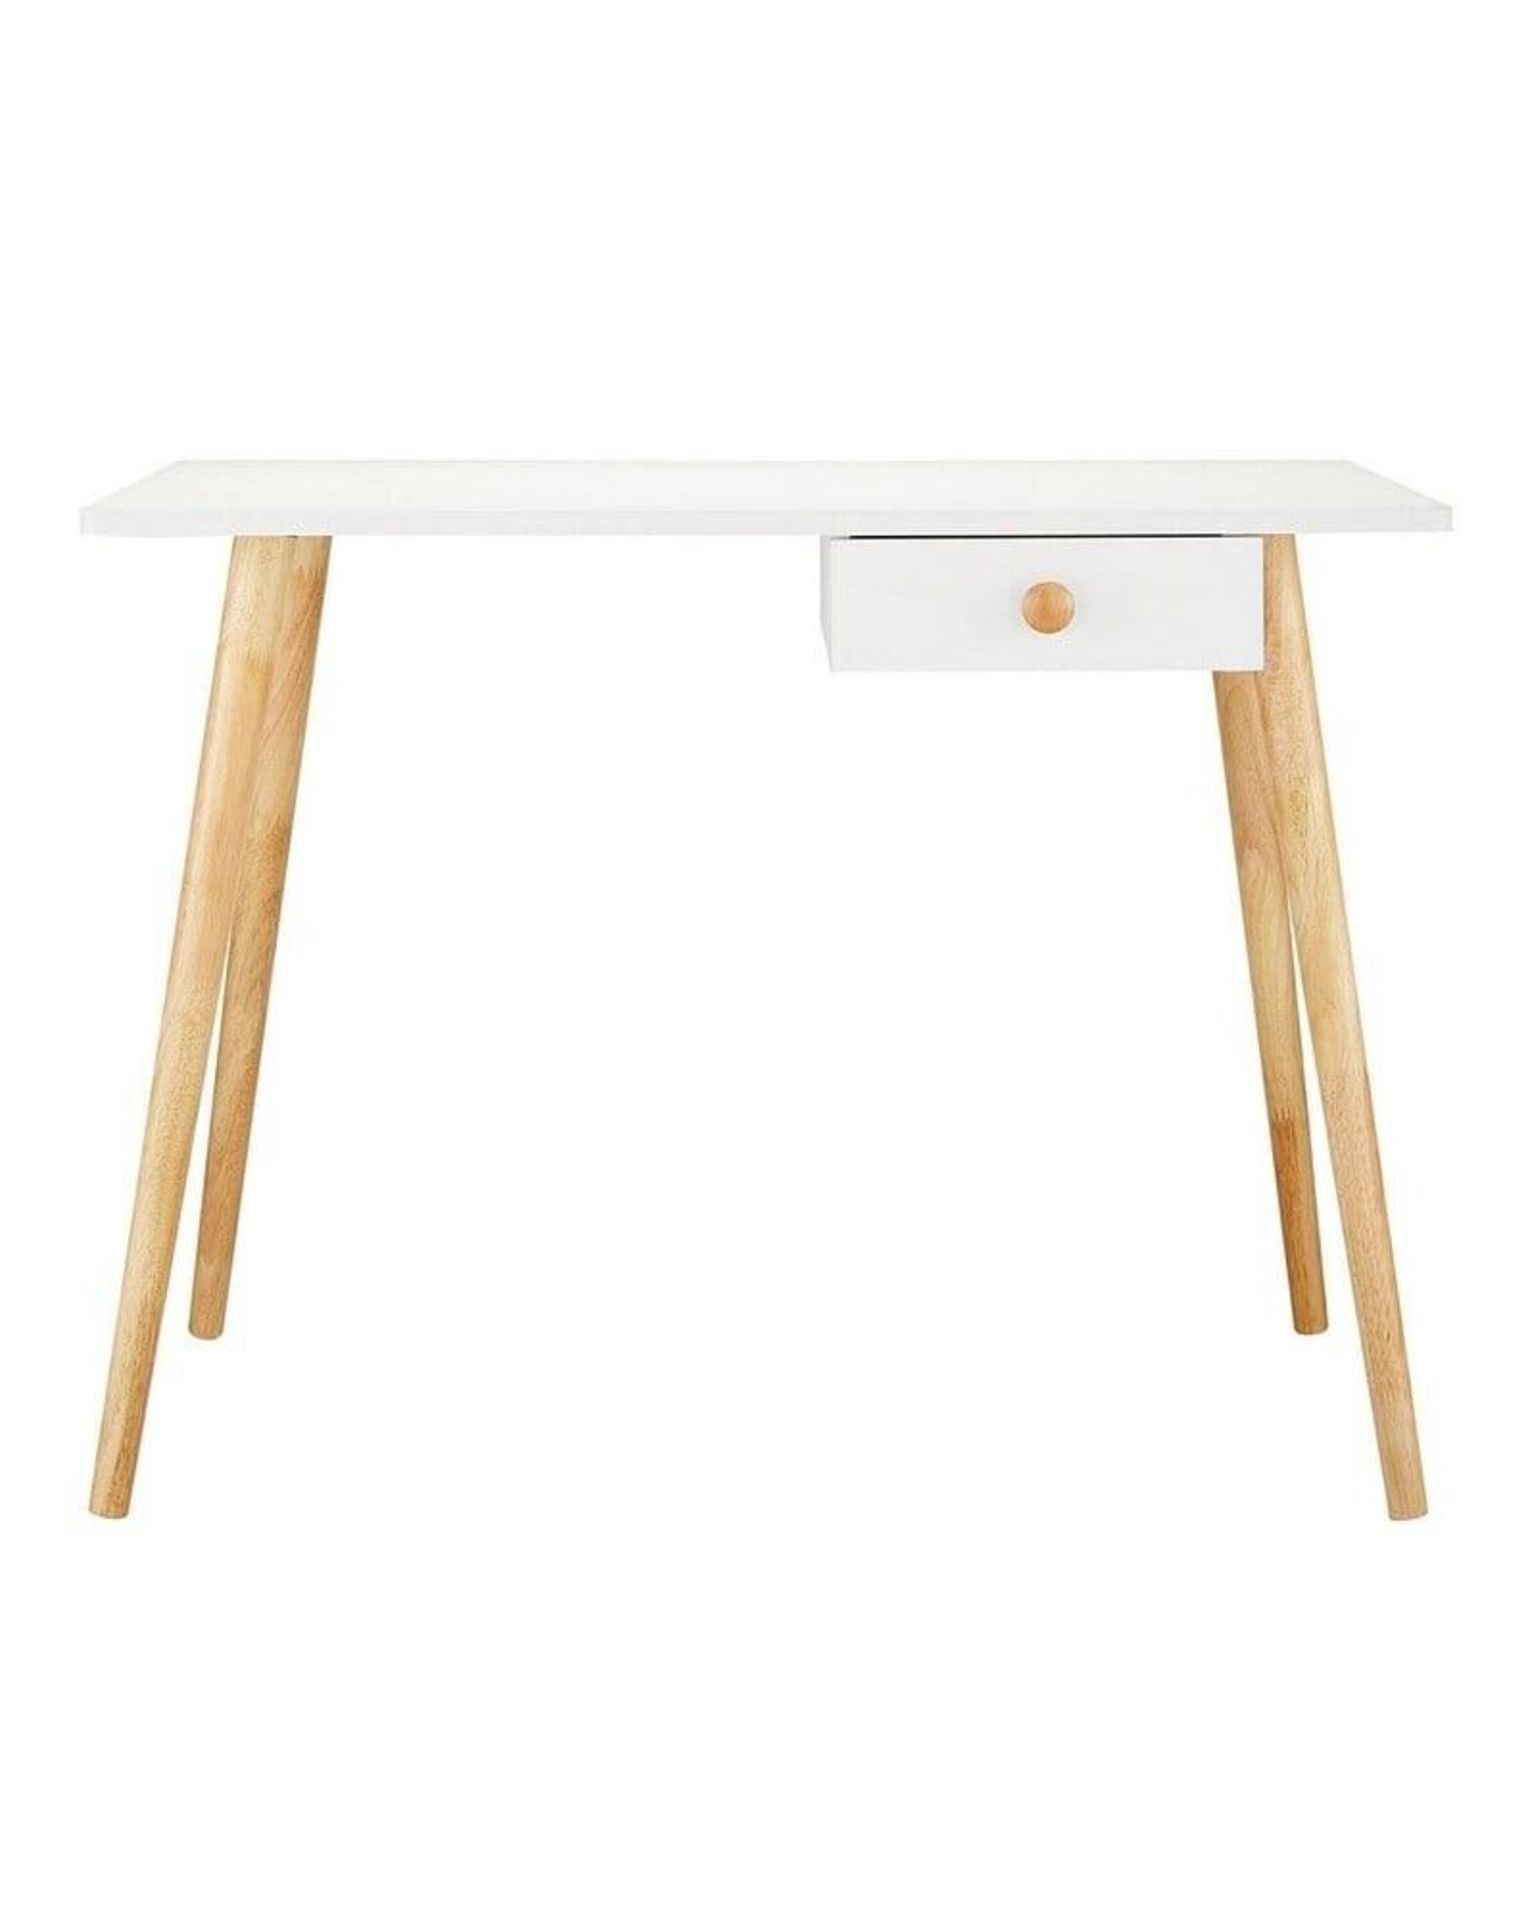 2 X Brand new Olsen GREY DESK. R13-13Stylish as well as practical, the Olsen Desk is perfect for